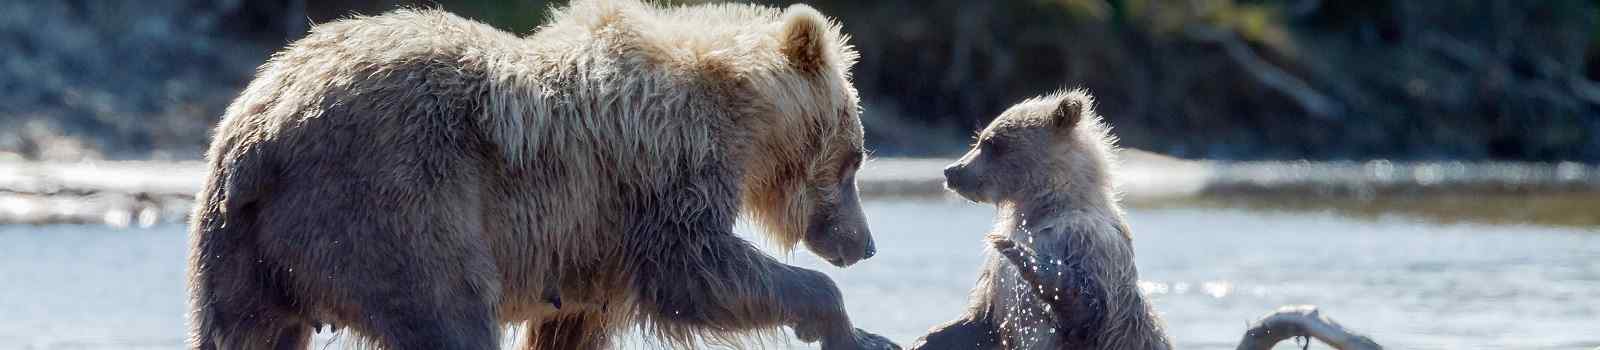 CA-SONORA Brown bear female and her cub shutterstock 421064782